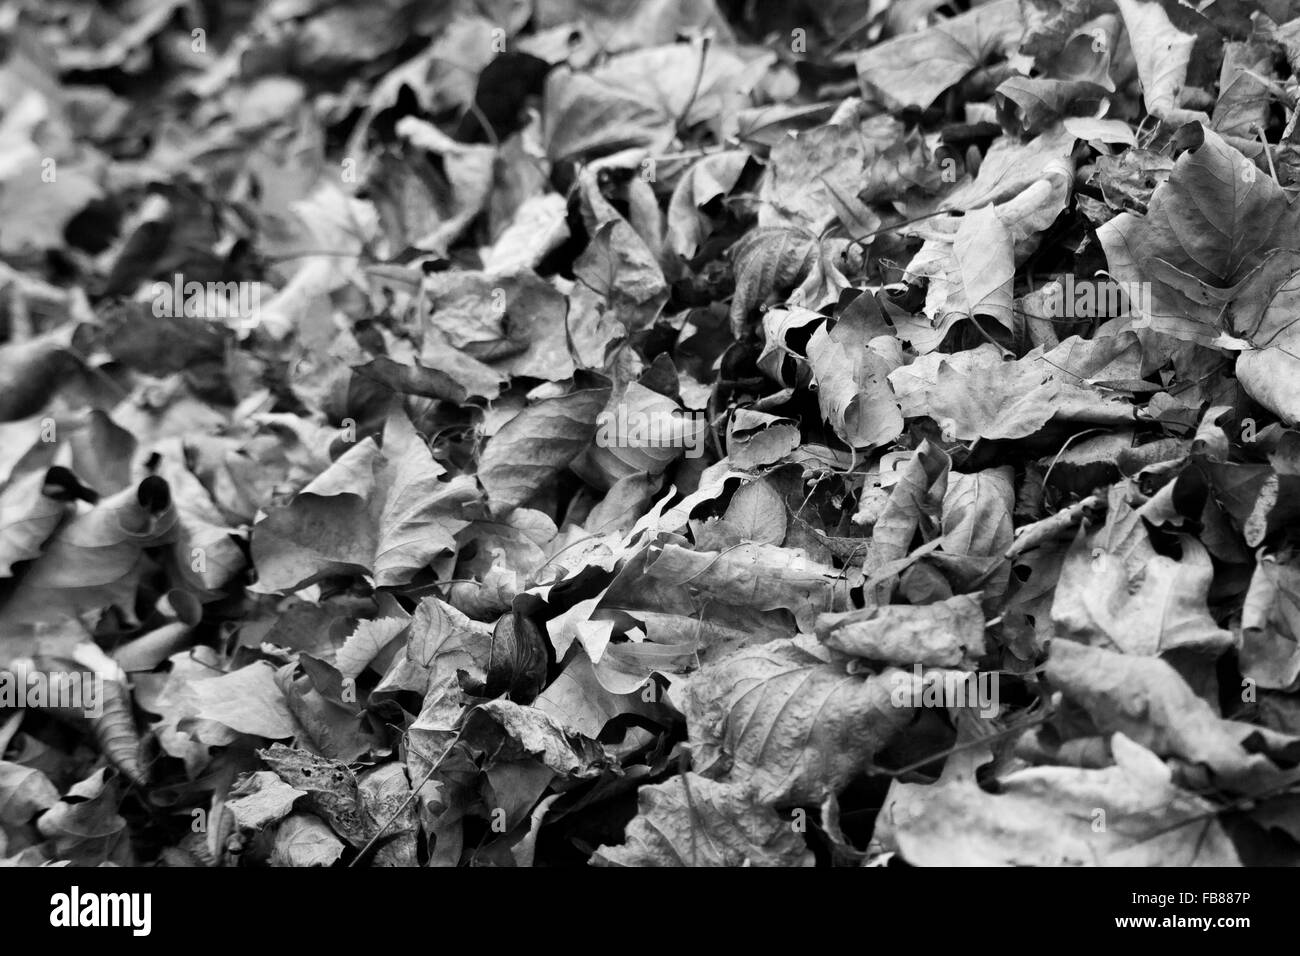 Background with ground covered in autumn leaves in black and white Stock Photo